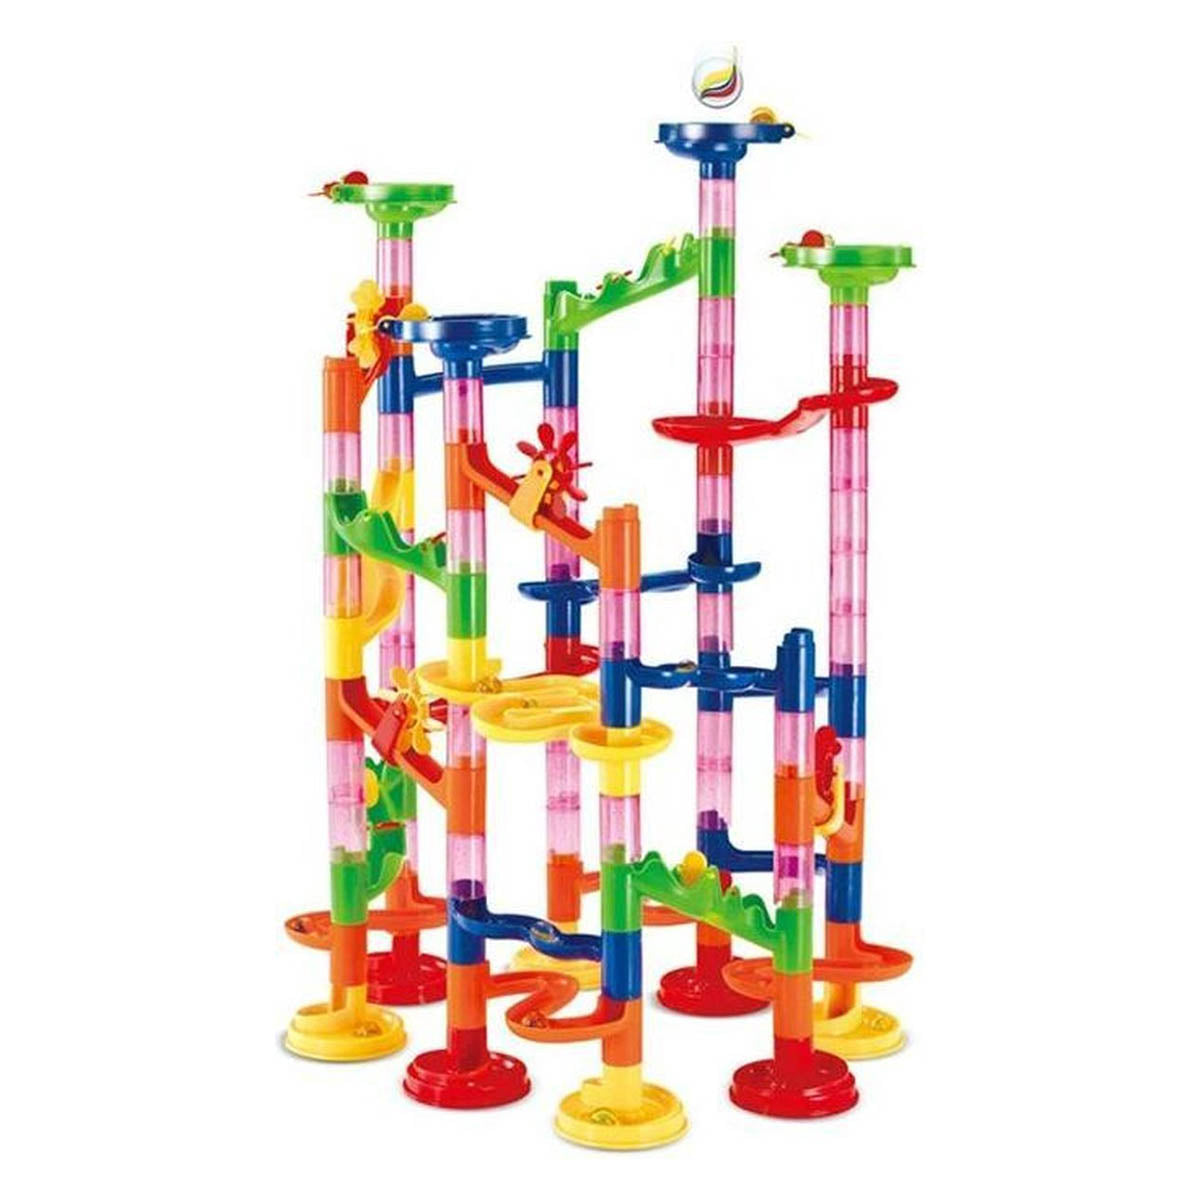 <tc>Ariko</tc> XXL marble track | 105 piece | incl 30 marbles | 12 different elements | puzzle | Roller coaster | Marble Racecourse | Spiral